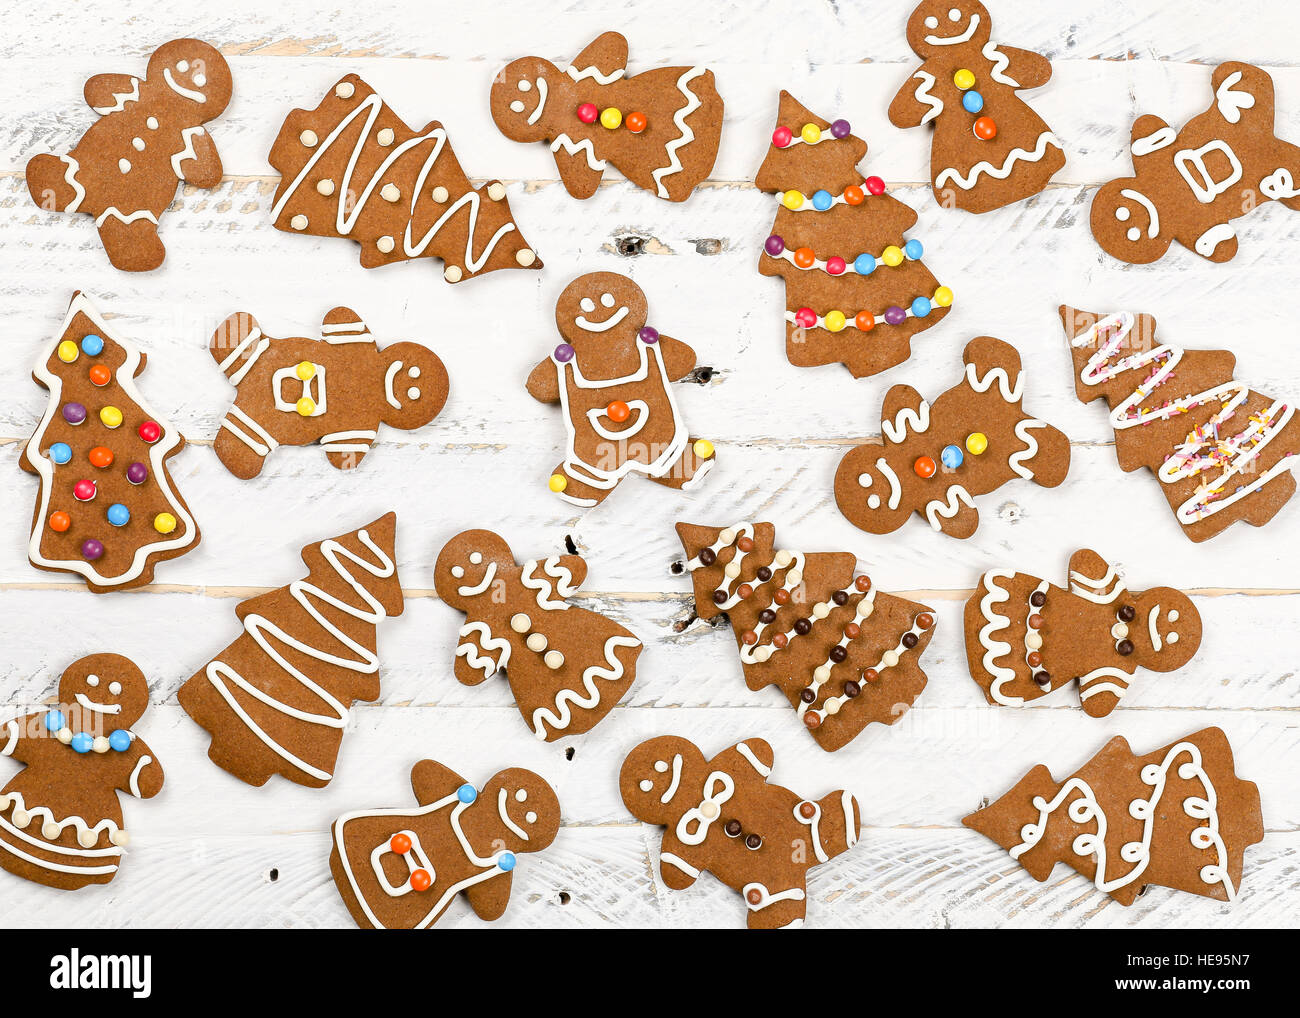 Christmas homemade gingerbread man family cookies couples on white wooden table background Stock Photo